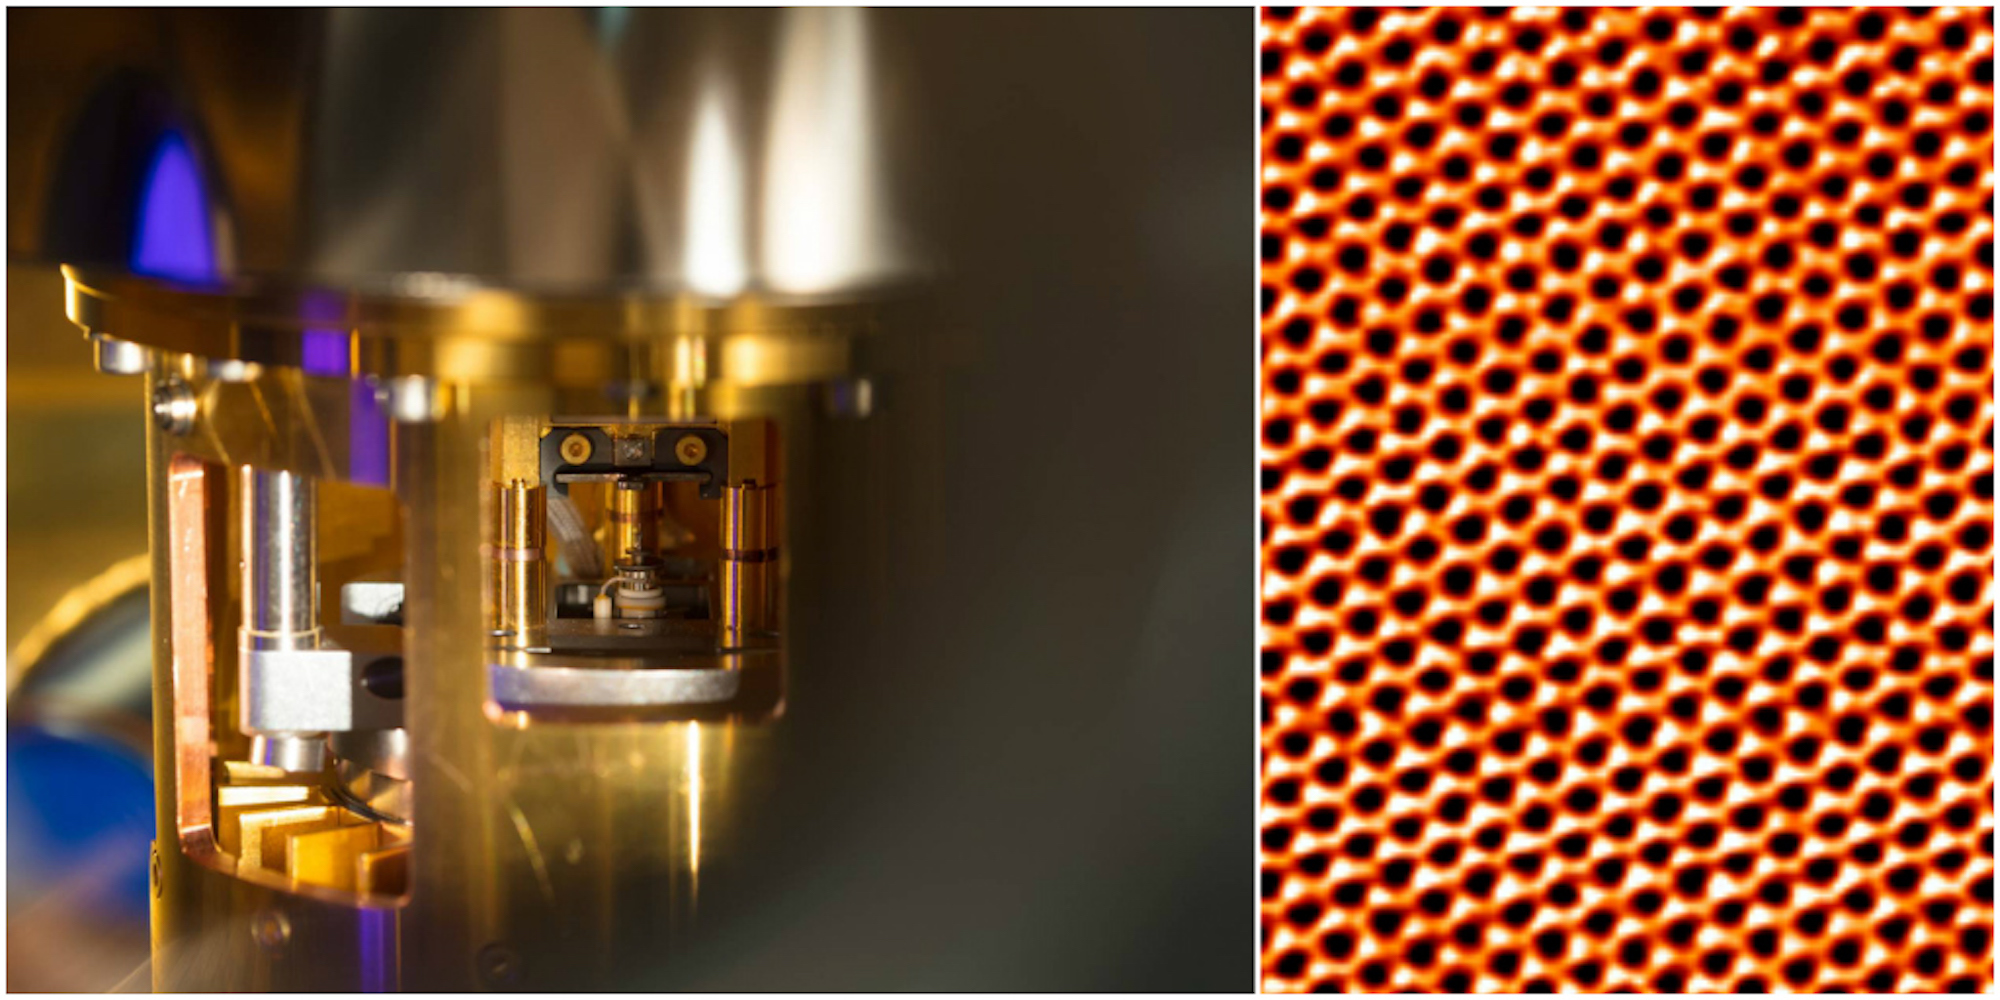 Scanning tunneling microscopes are used to observe the natural movement of atom-thick layers of graphene (left). The resulting image of a sheet of graphene resembles a honeycomb pattern.